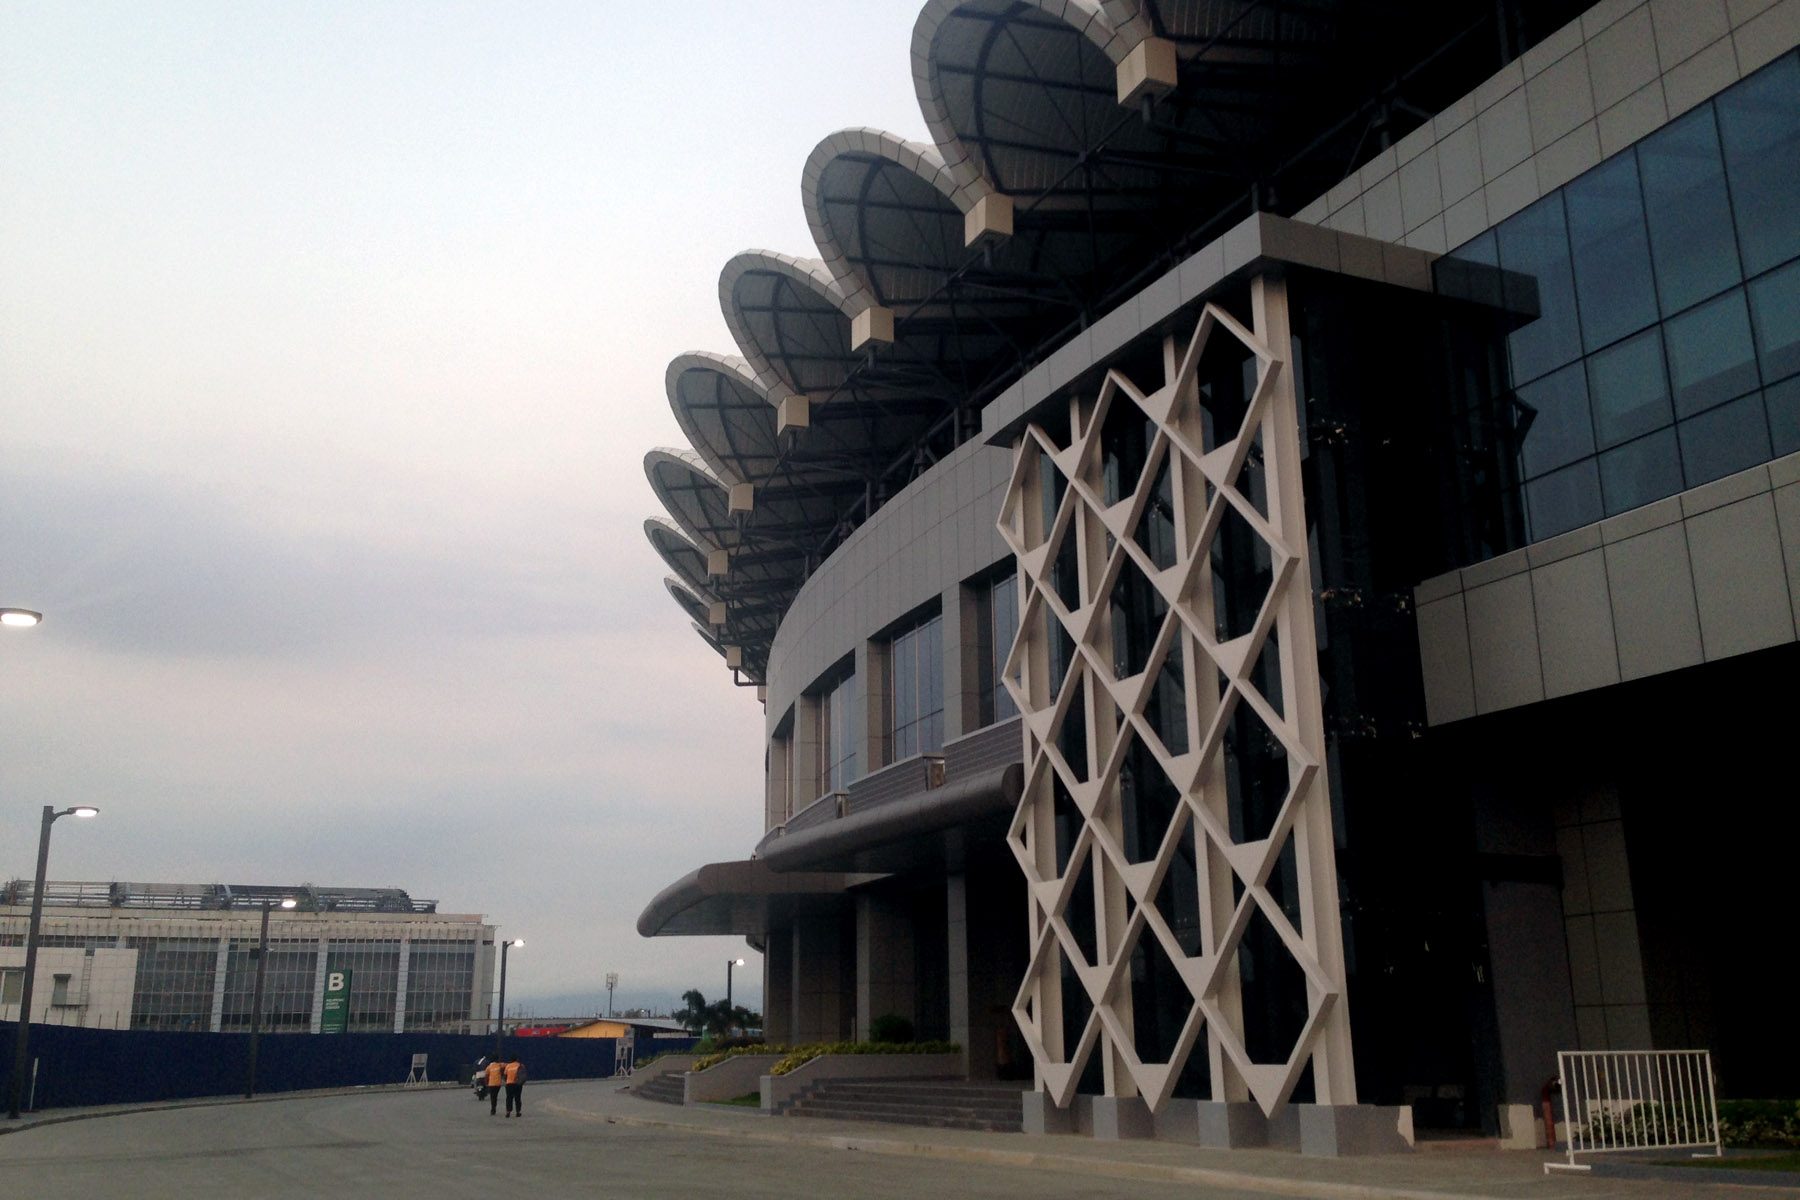 IN PHOTOS: A glimpse inside the Philippine Sports Stadium